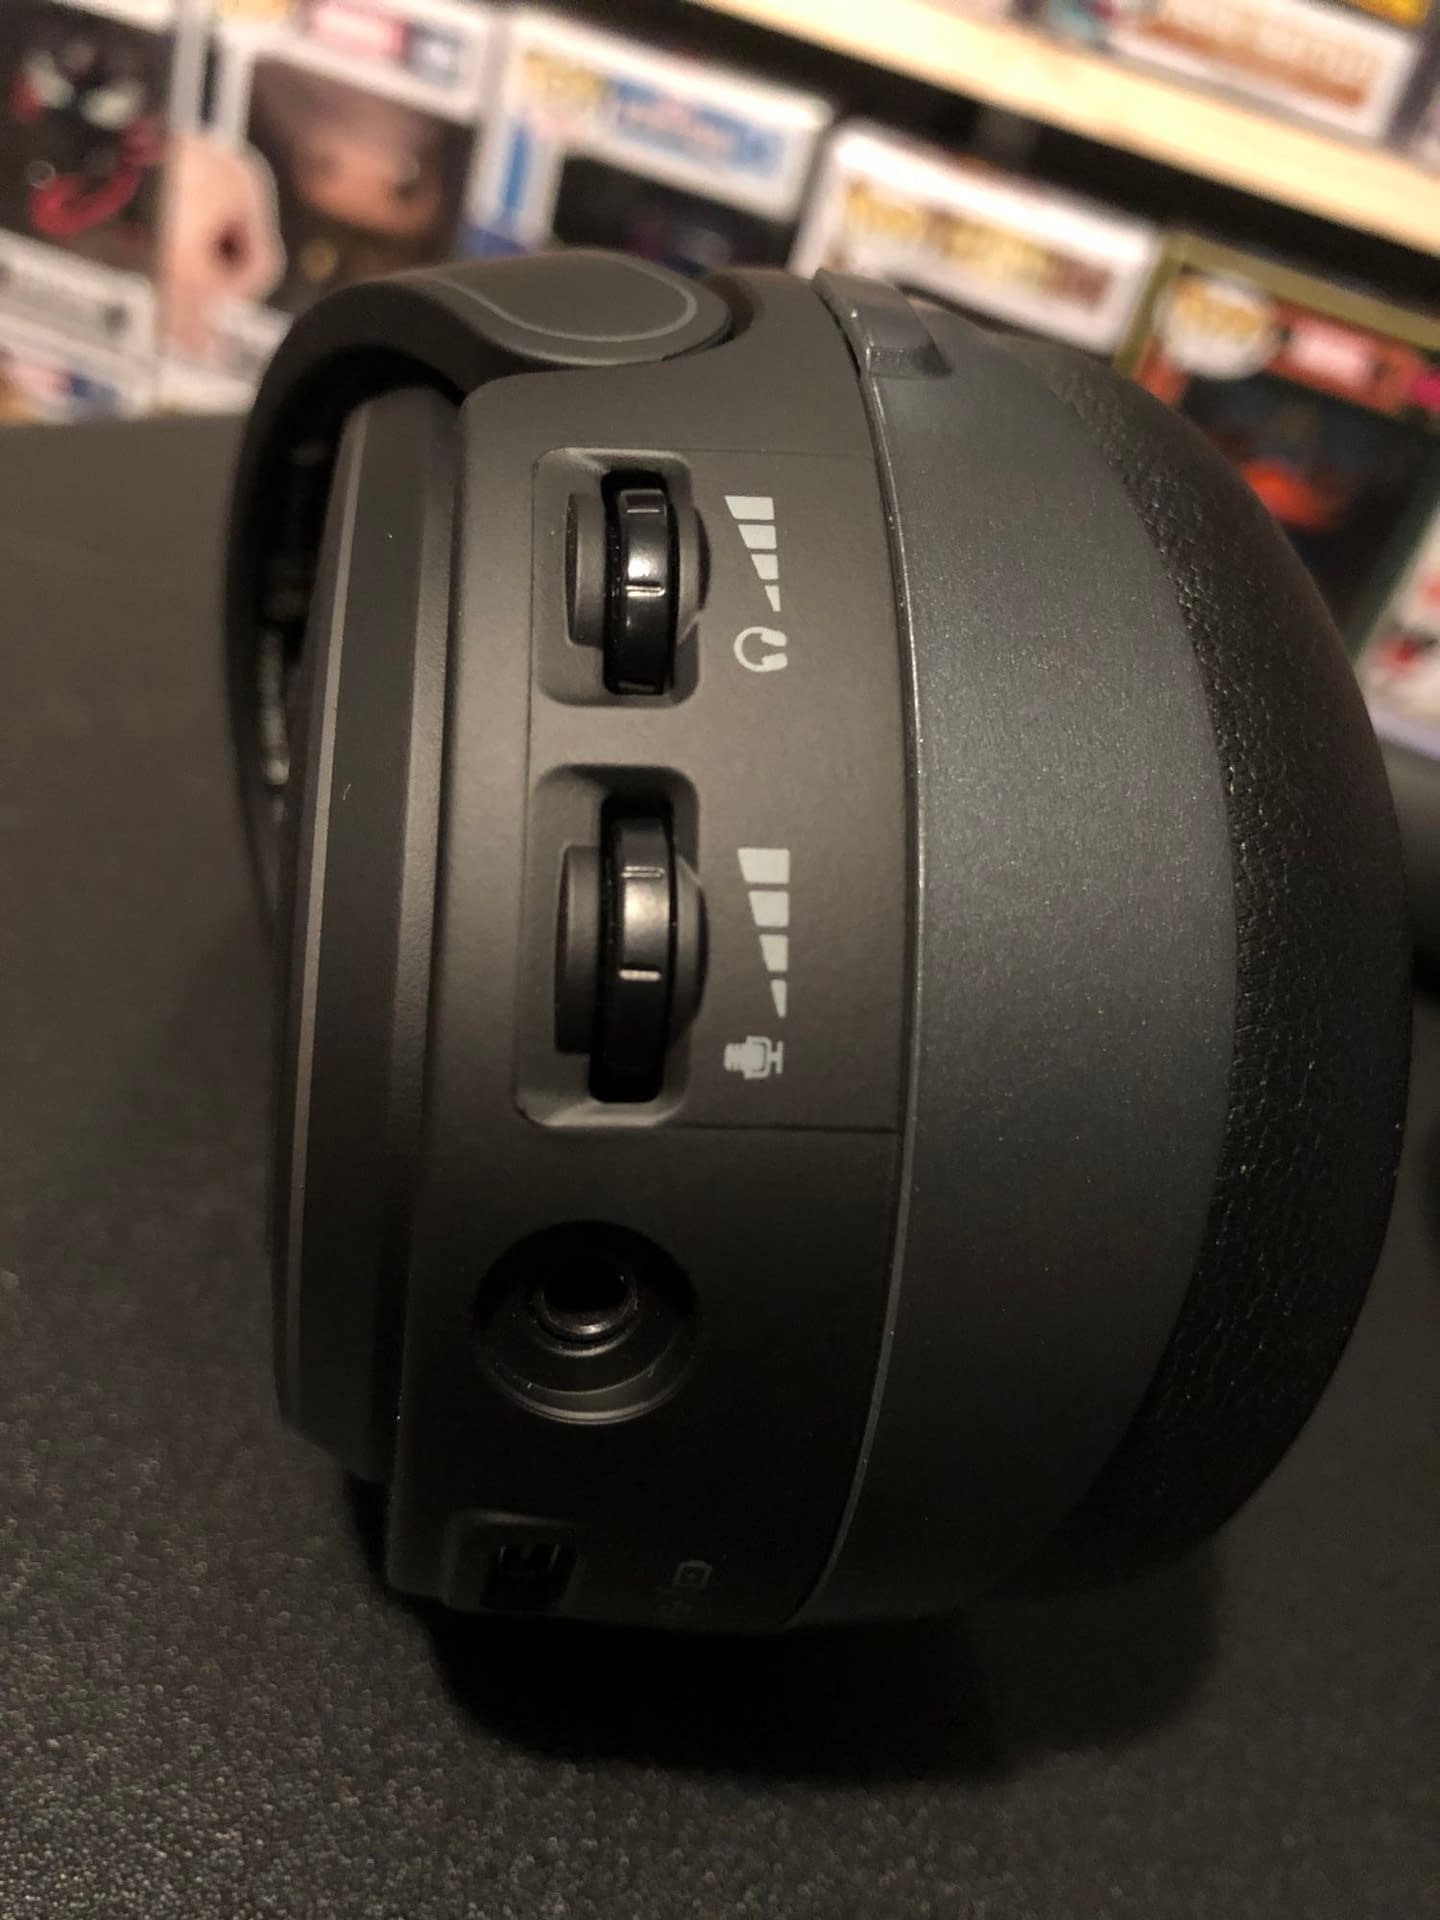 Audeze Mobius Gaming Headset Brings Comfort and Quality